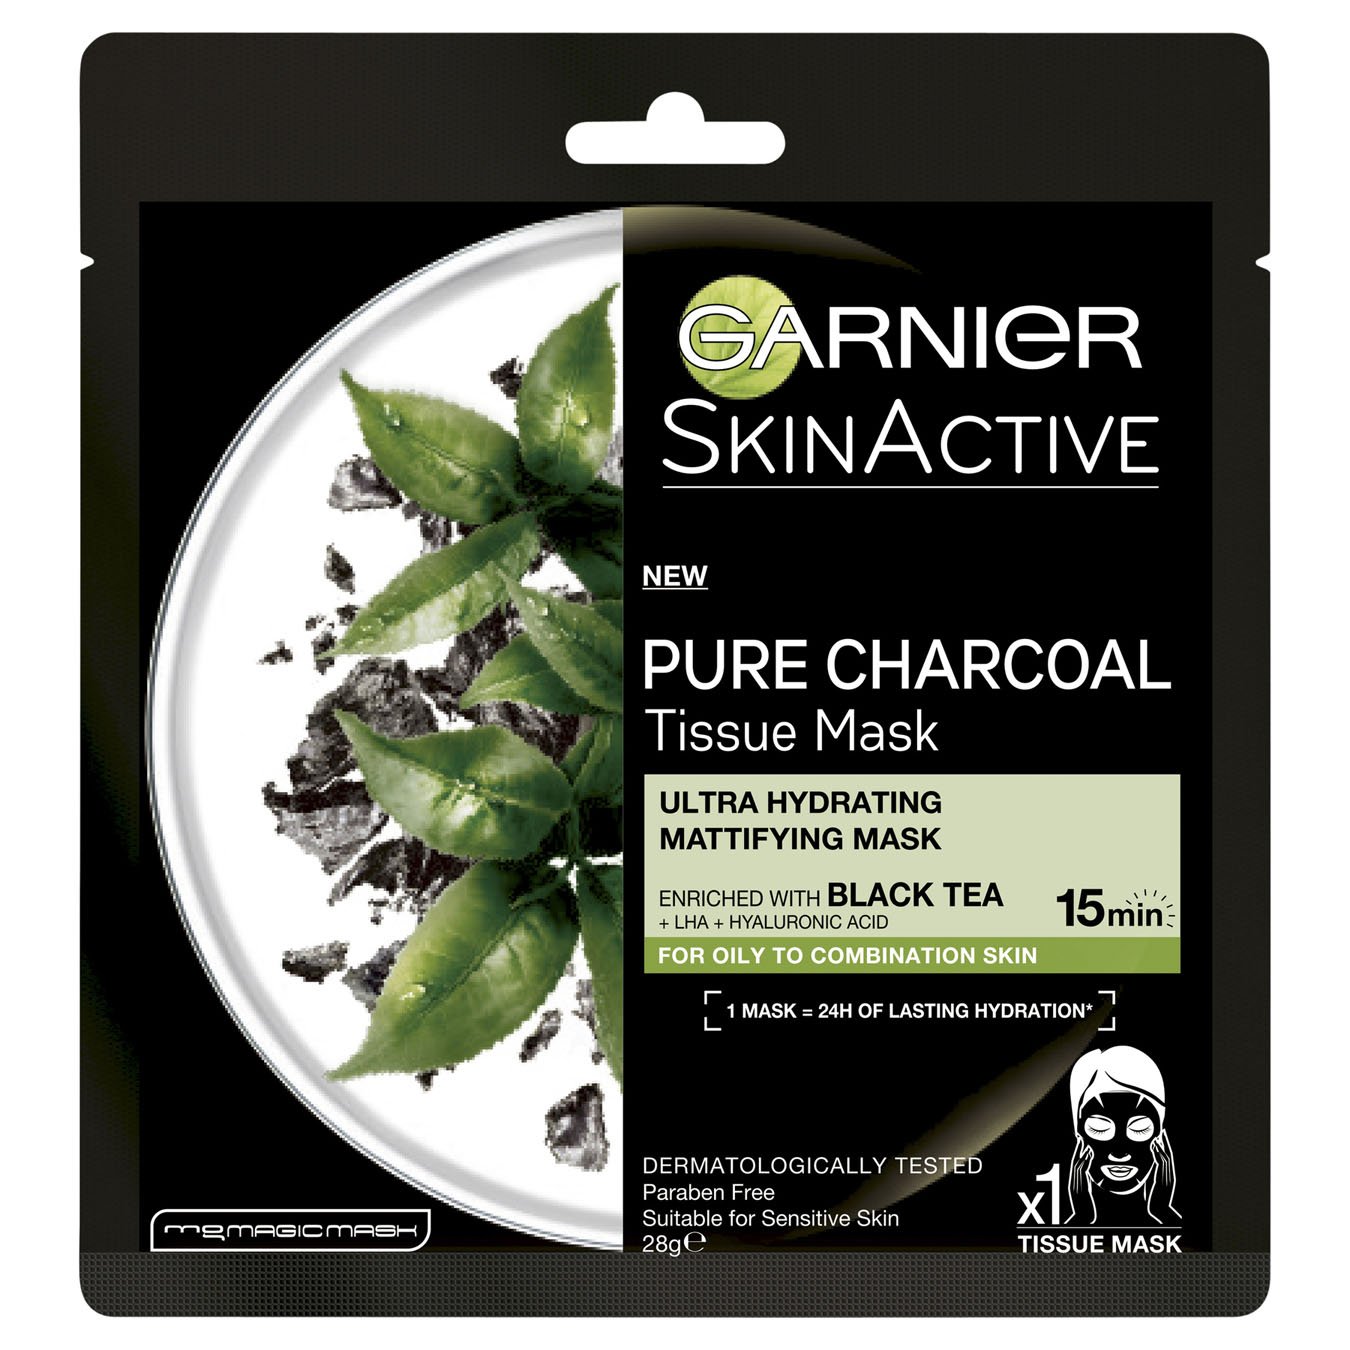 Charcoal tissue mask